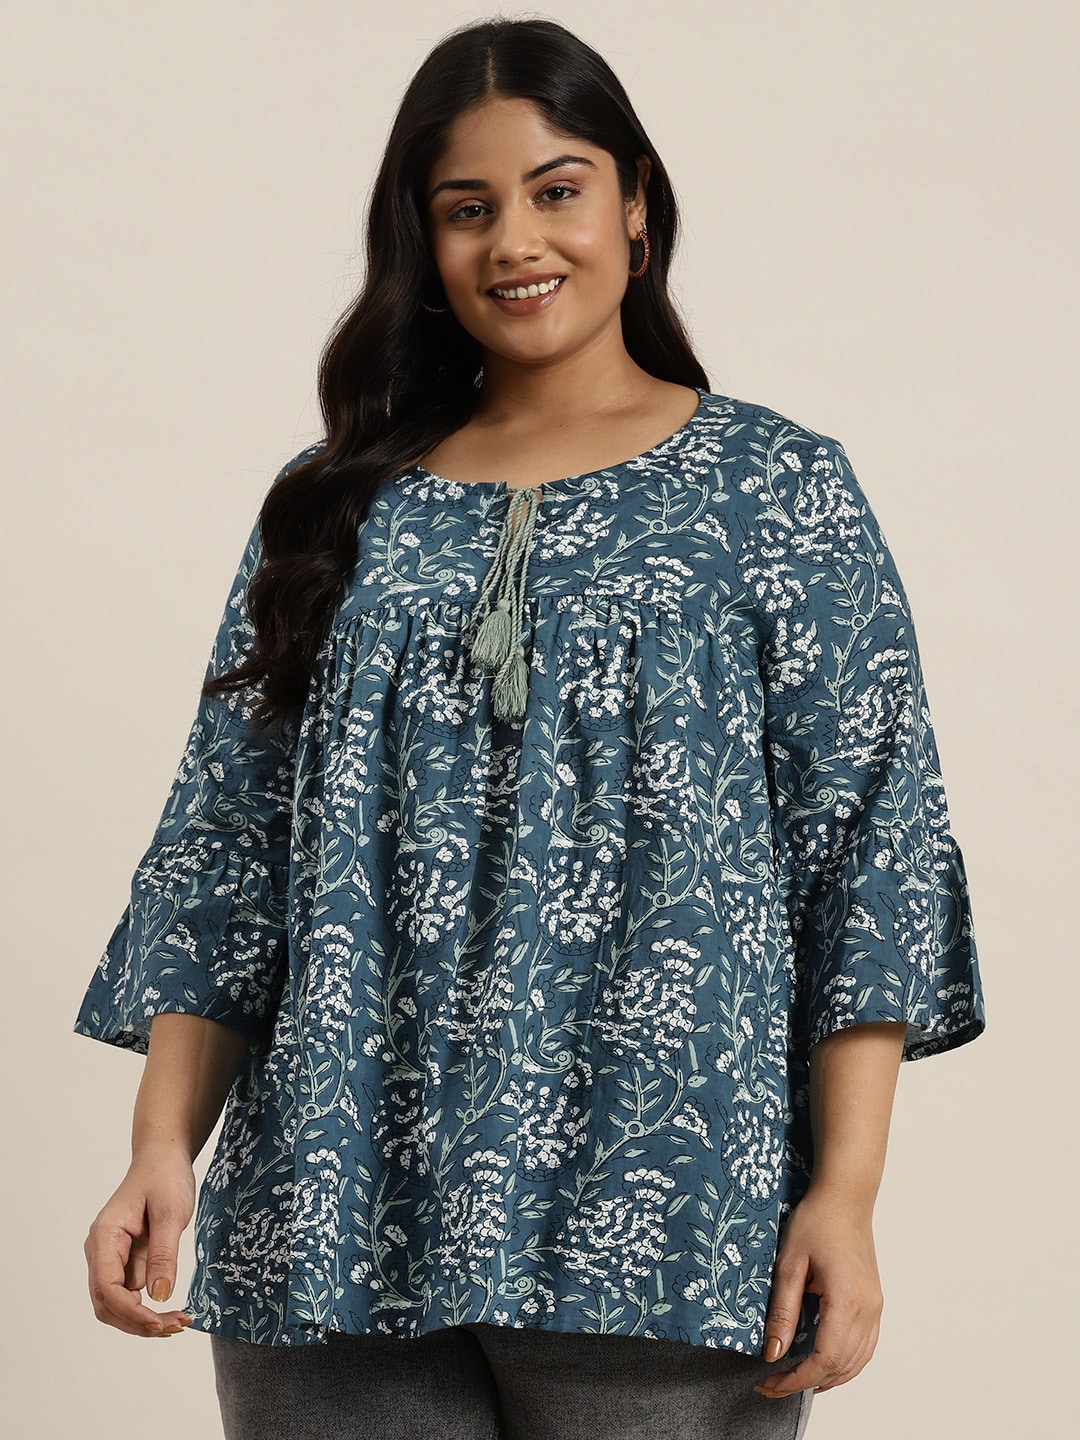 Sztori Plus Size Floral Printed Flared Sleeves Pure Cotton Pleated Kurti Price in India